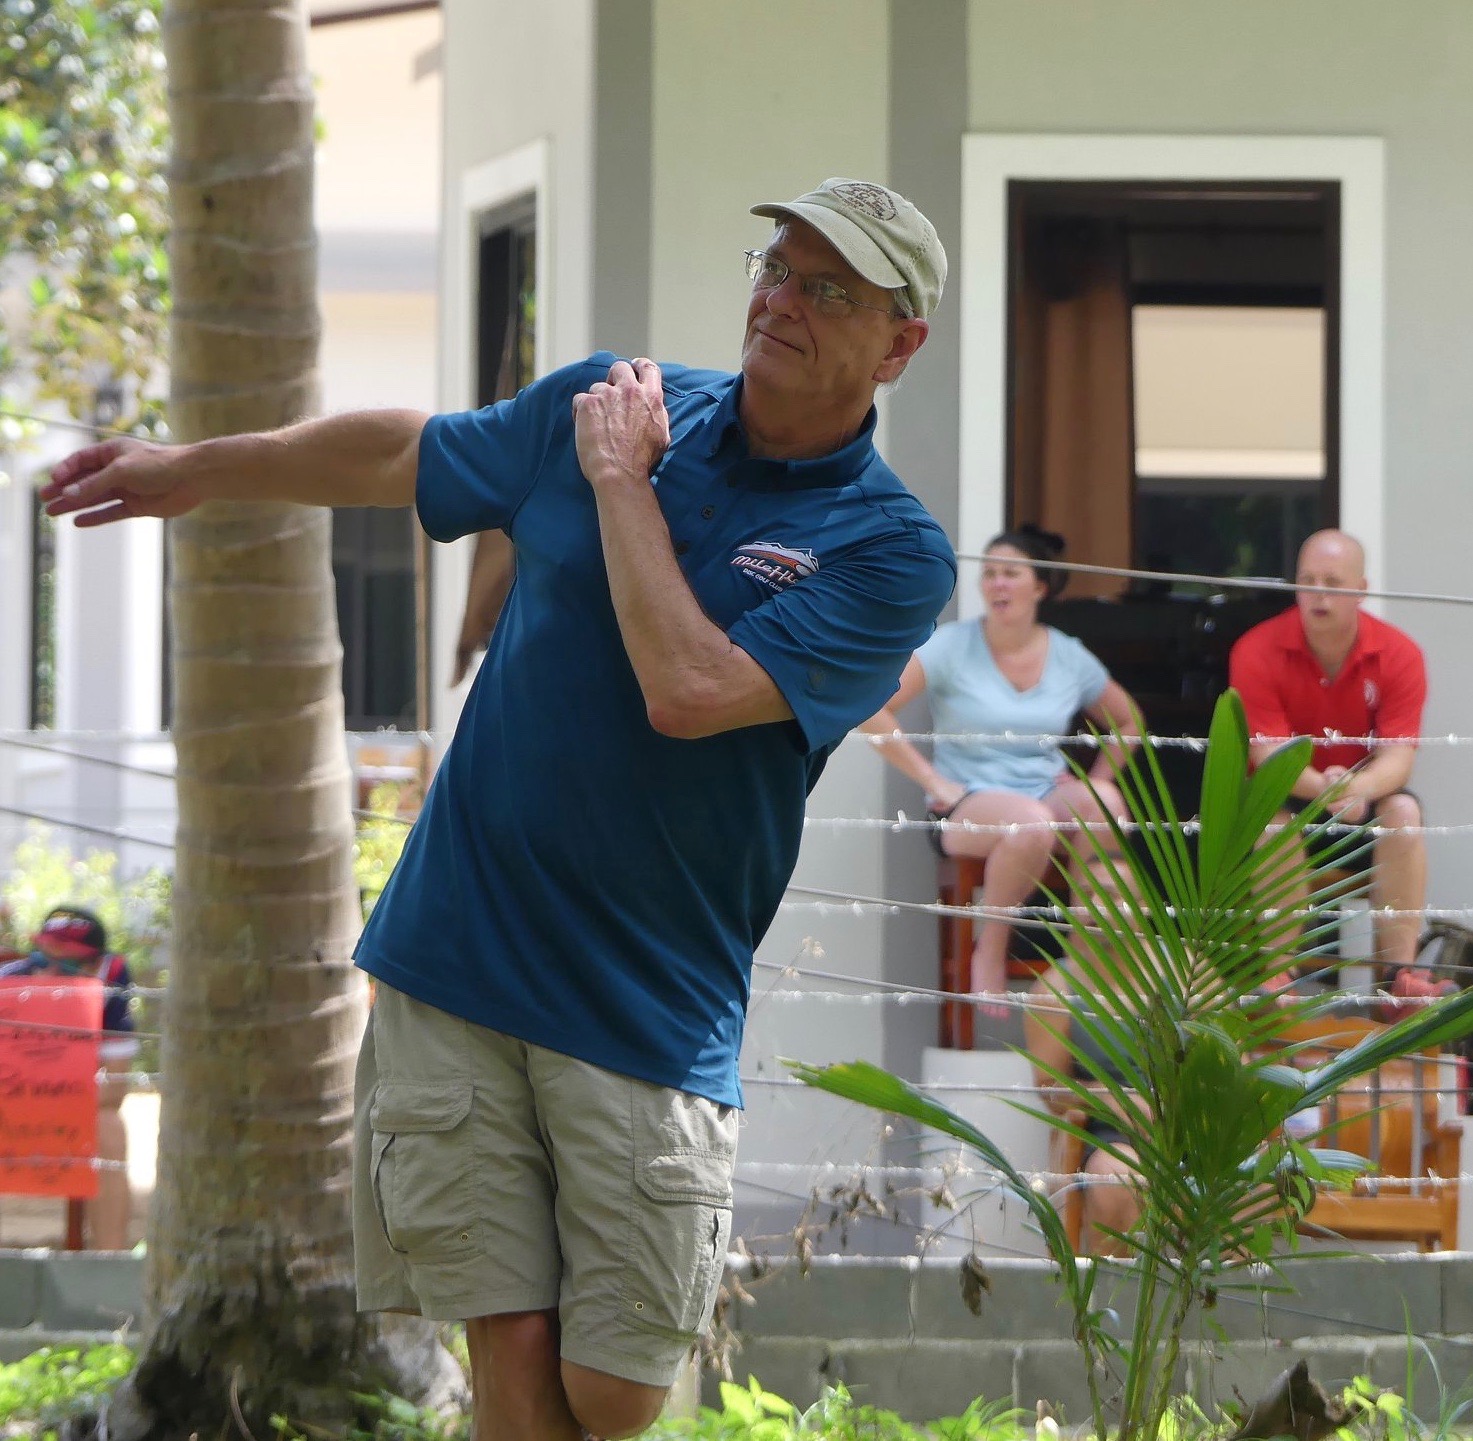 Get to Know the 6 Candidates for the PDGA Global Board of Directors Professional Disc Golf Association photo